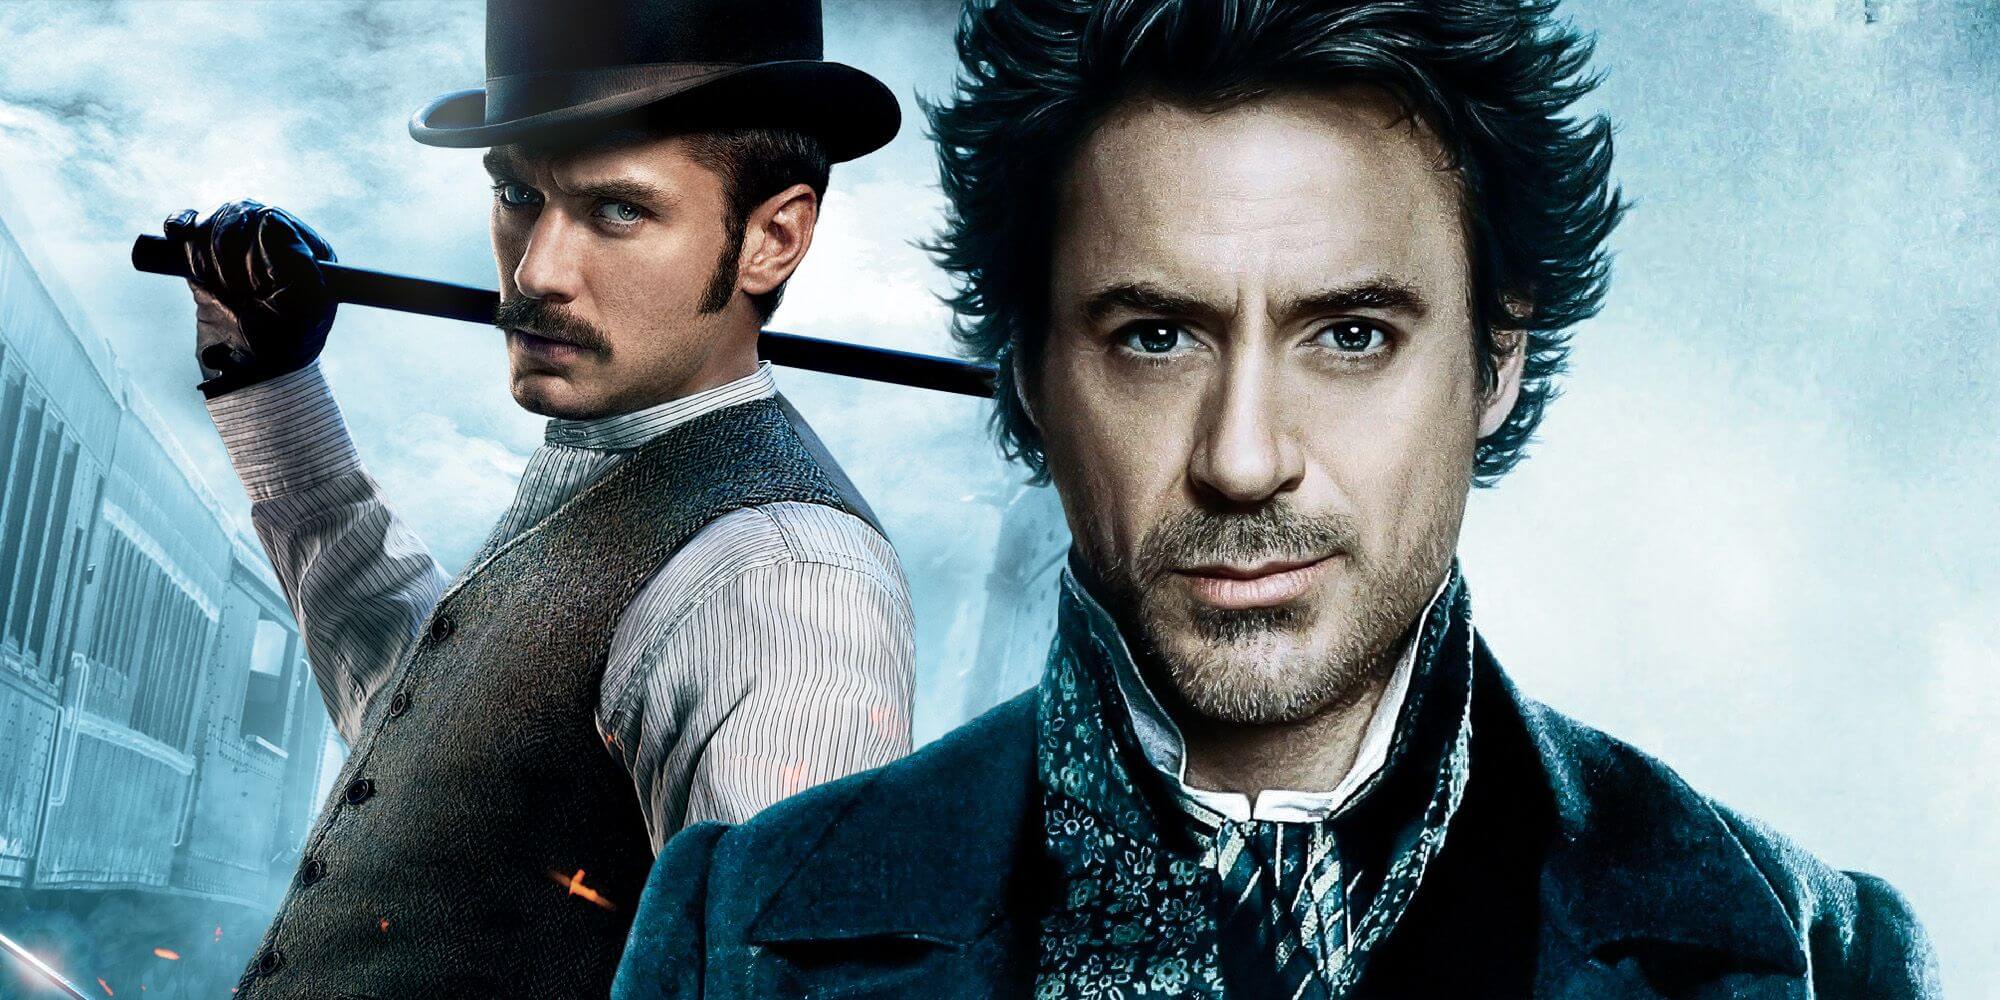 The Sherlock Holmes universe may be branching out to two new TV series